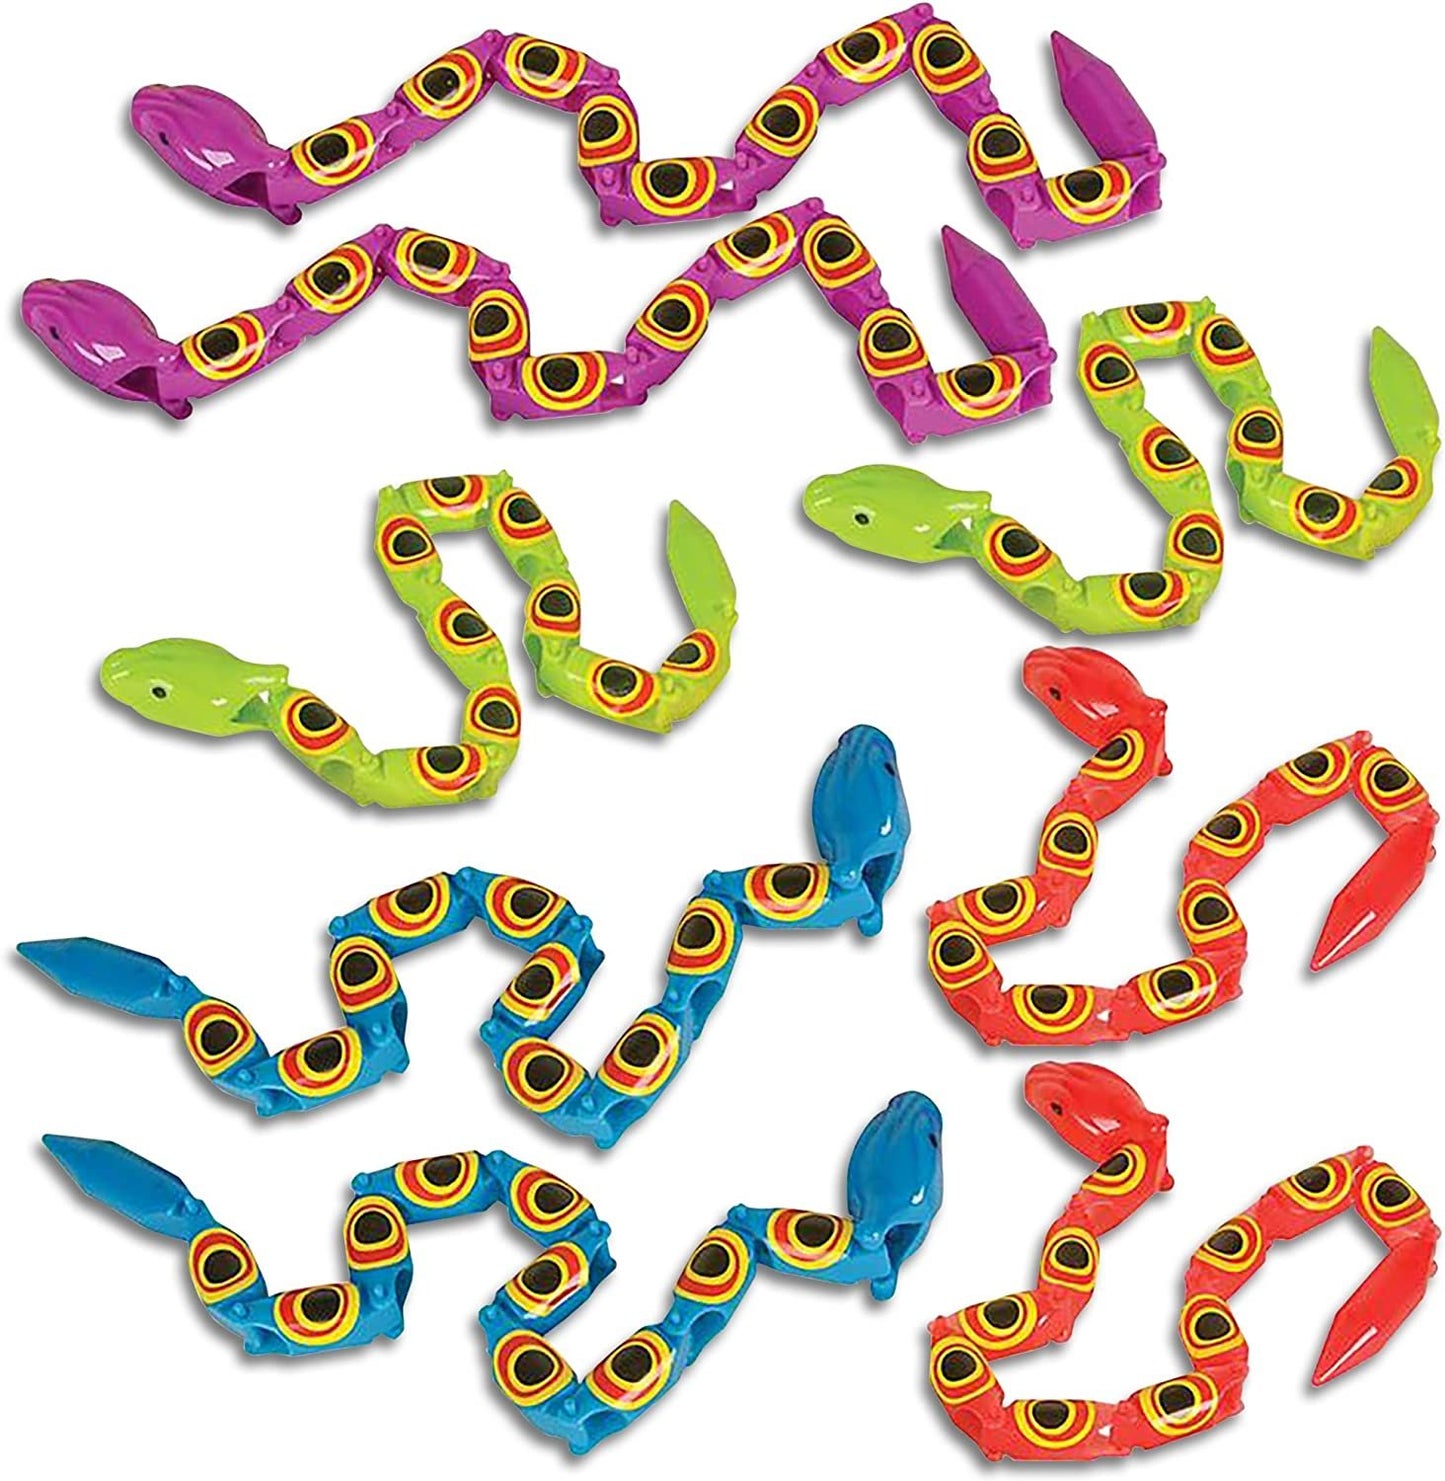 ArtCreativity Jointed Snake Toys Set of 12 - 15 Inch Long Plastic Snakes with Joining Pieces - Great Party Favor - Fidget Toy for Kids, Gift Idea for Boys and Girls, Carnival Prize - Sensory Toy